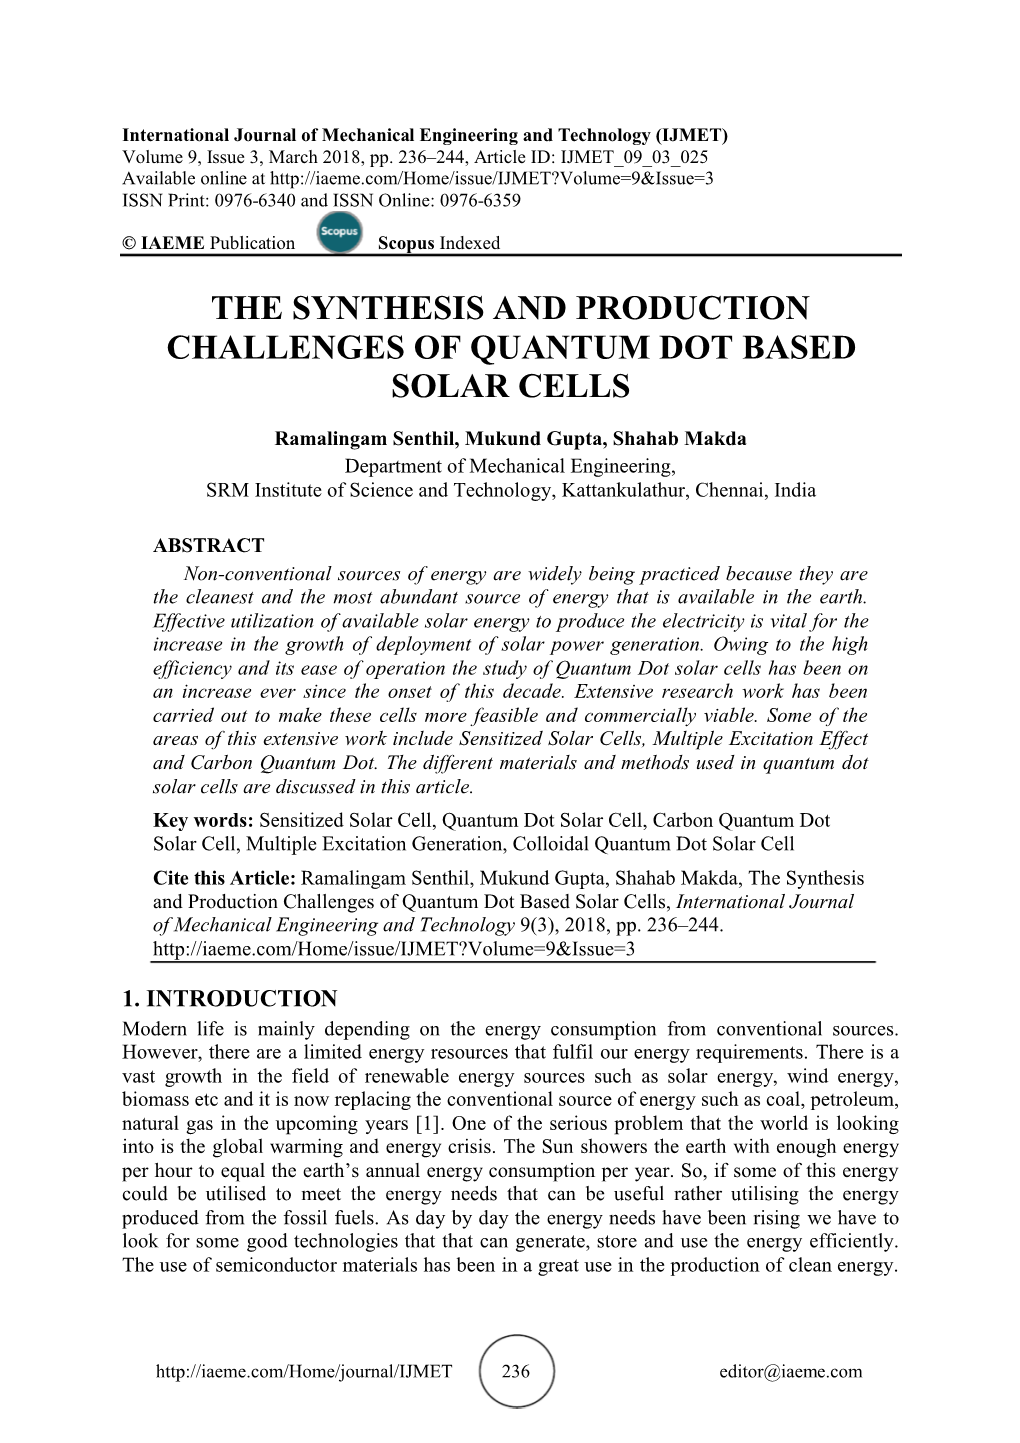 The Synthesis and Production Challenges of Quantum Dot Based Solar Cells